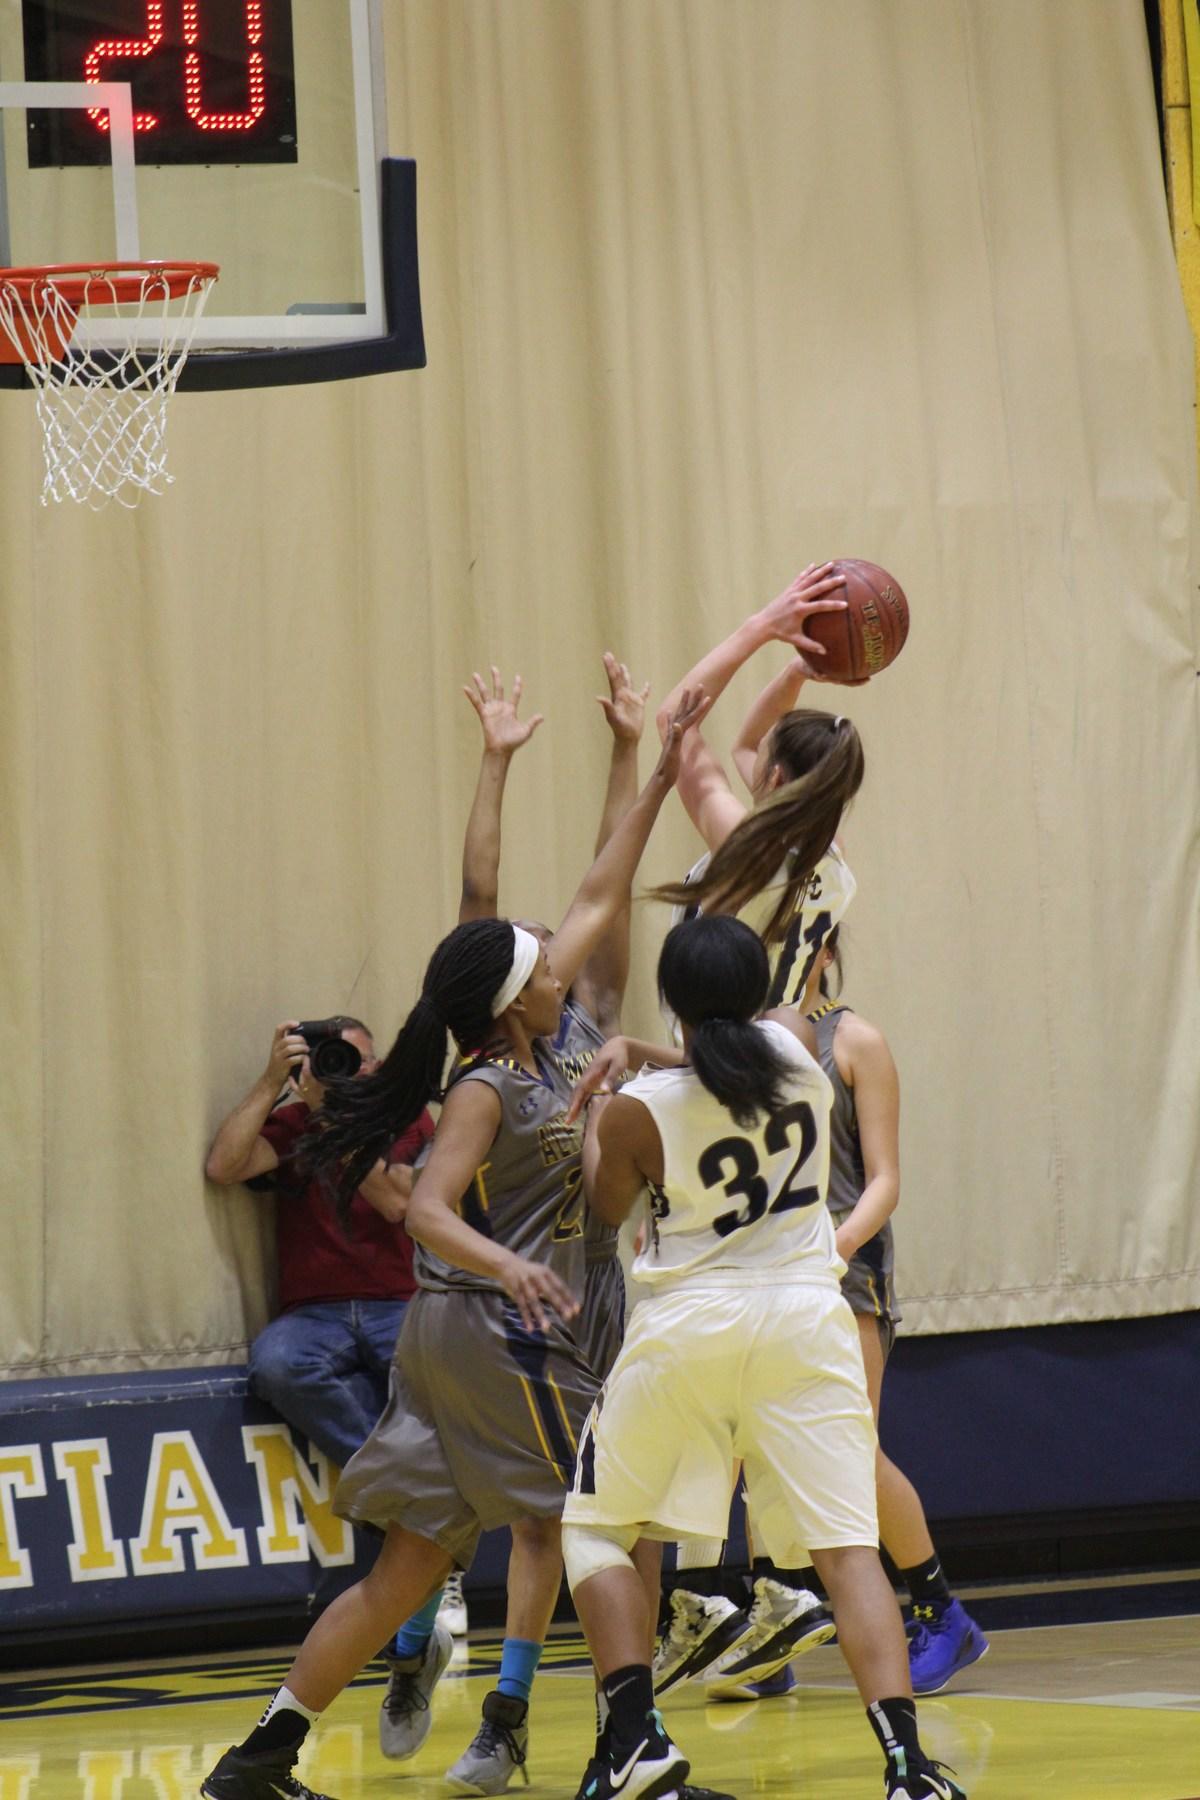 Basketball player in mid shot, as she's being guarded by the other team.